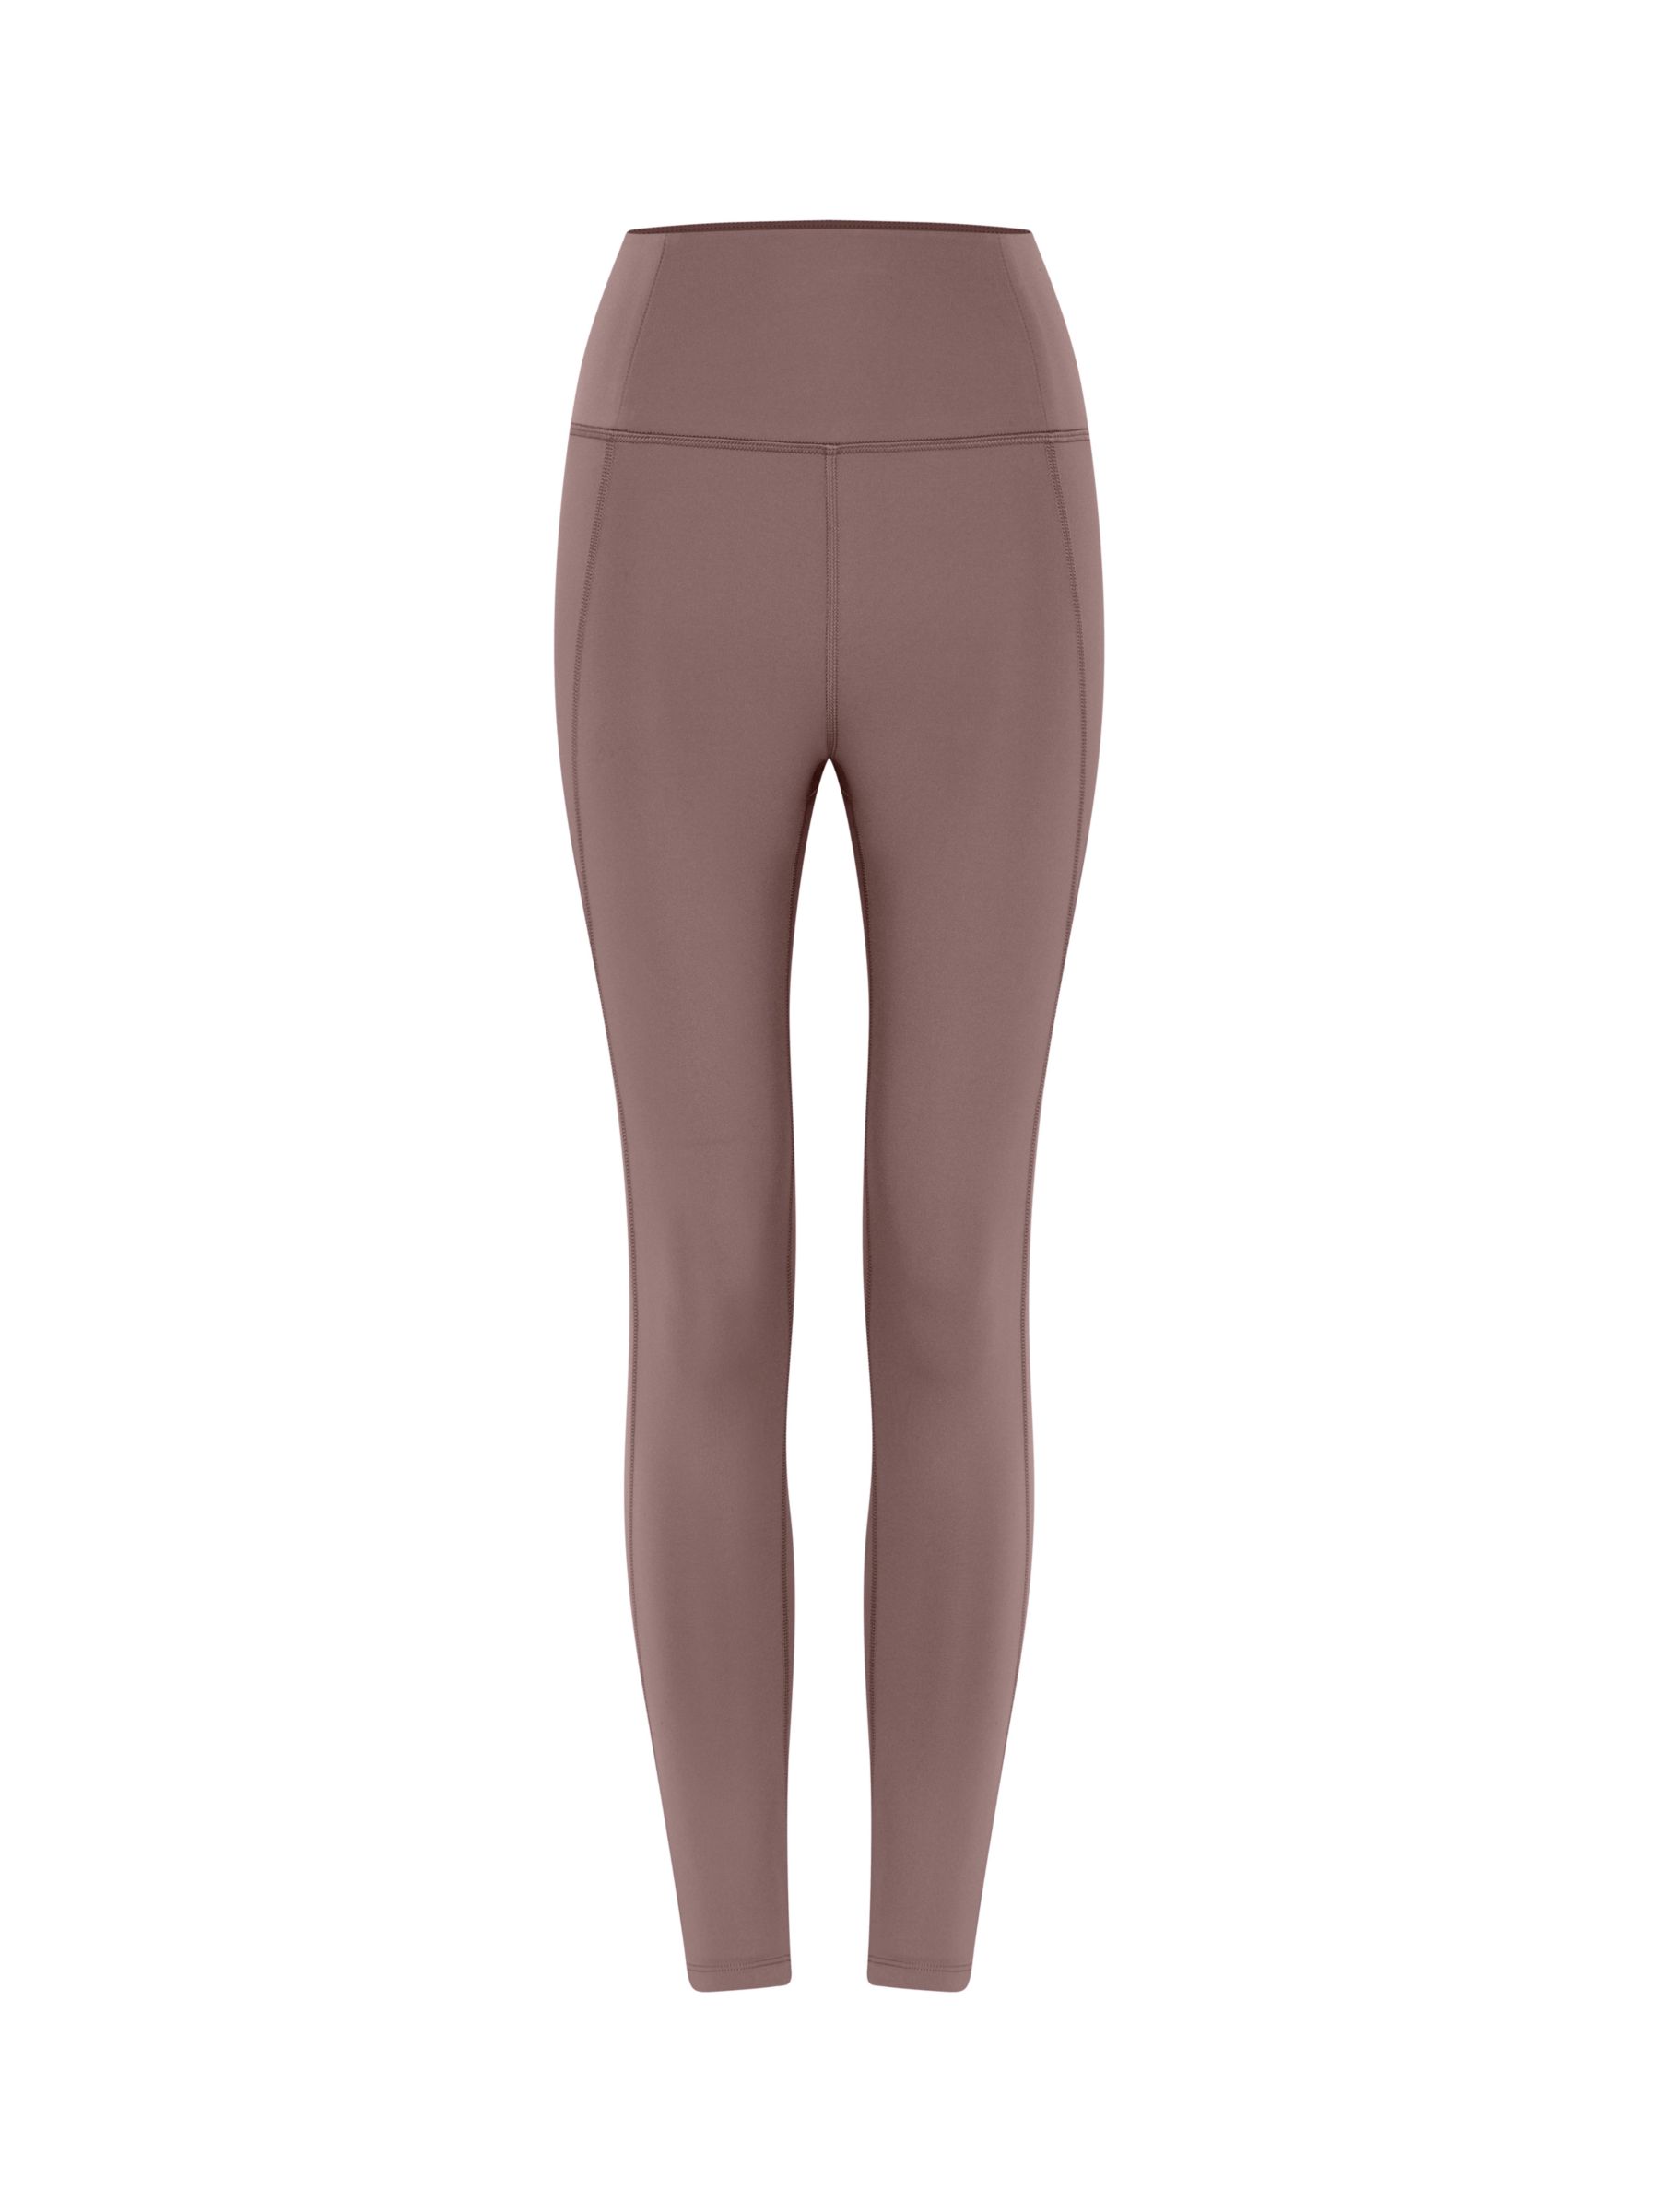 Girlfriend Collective Compressive High Rise Long Leggings, £68.00